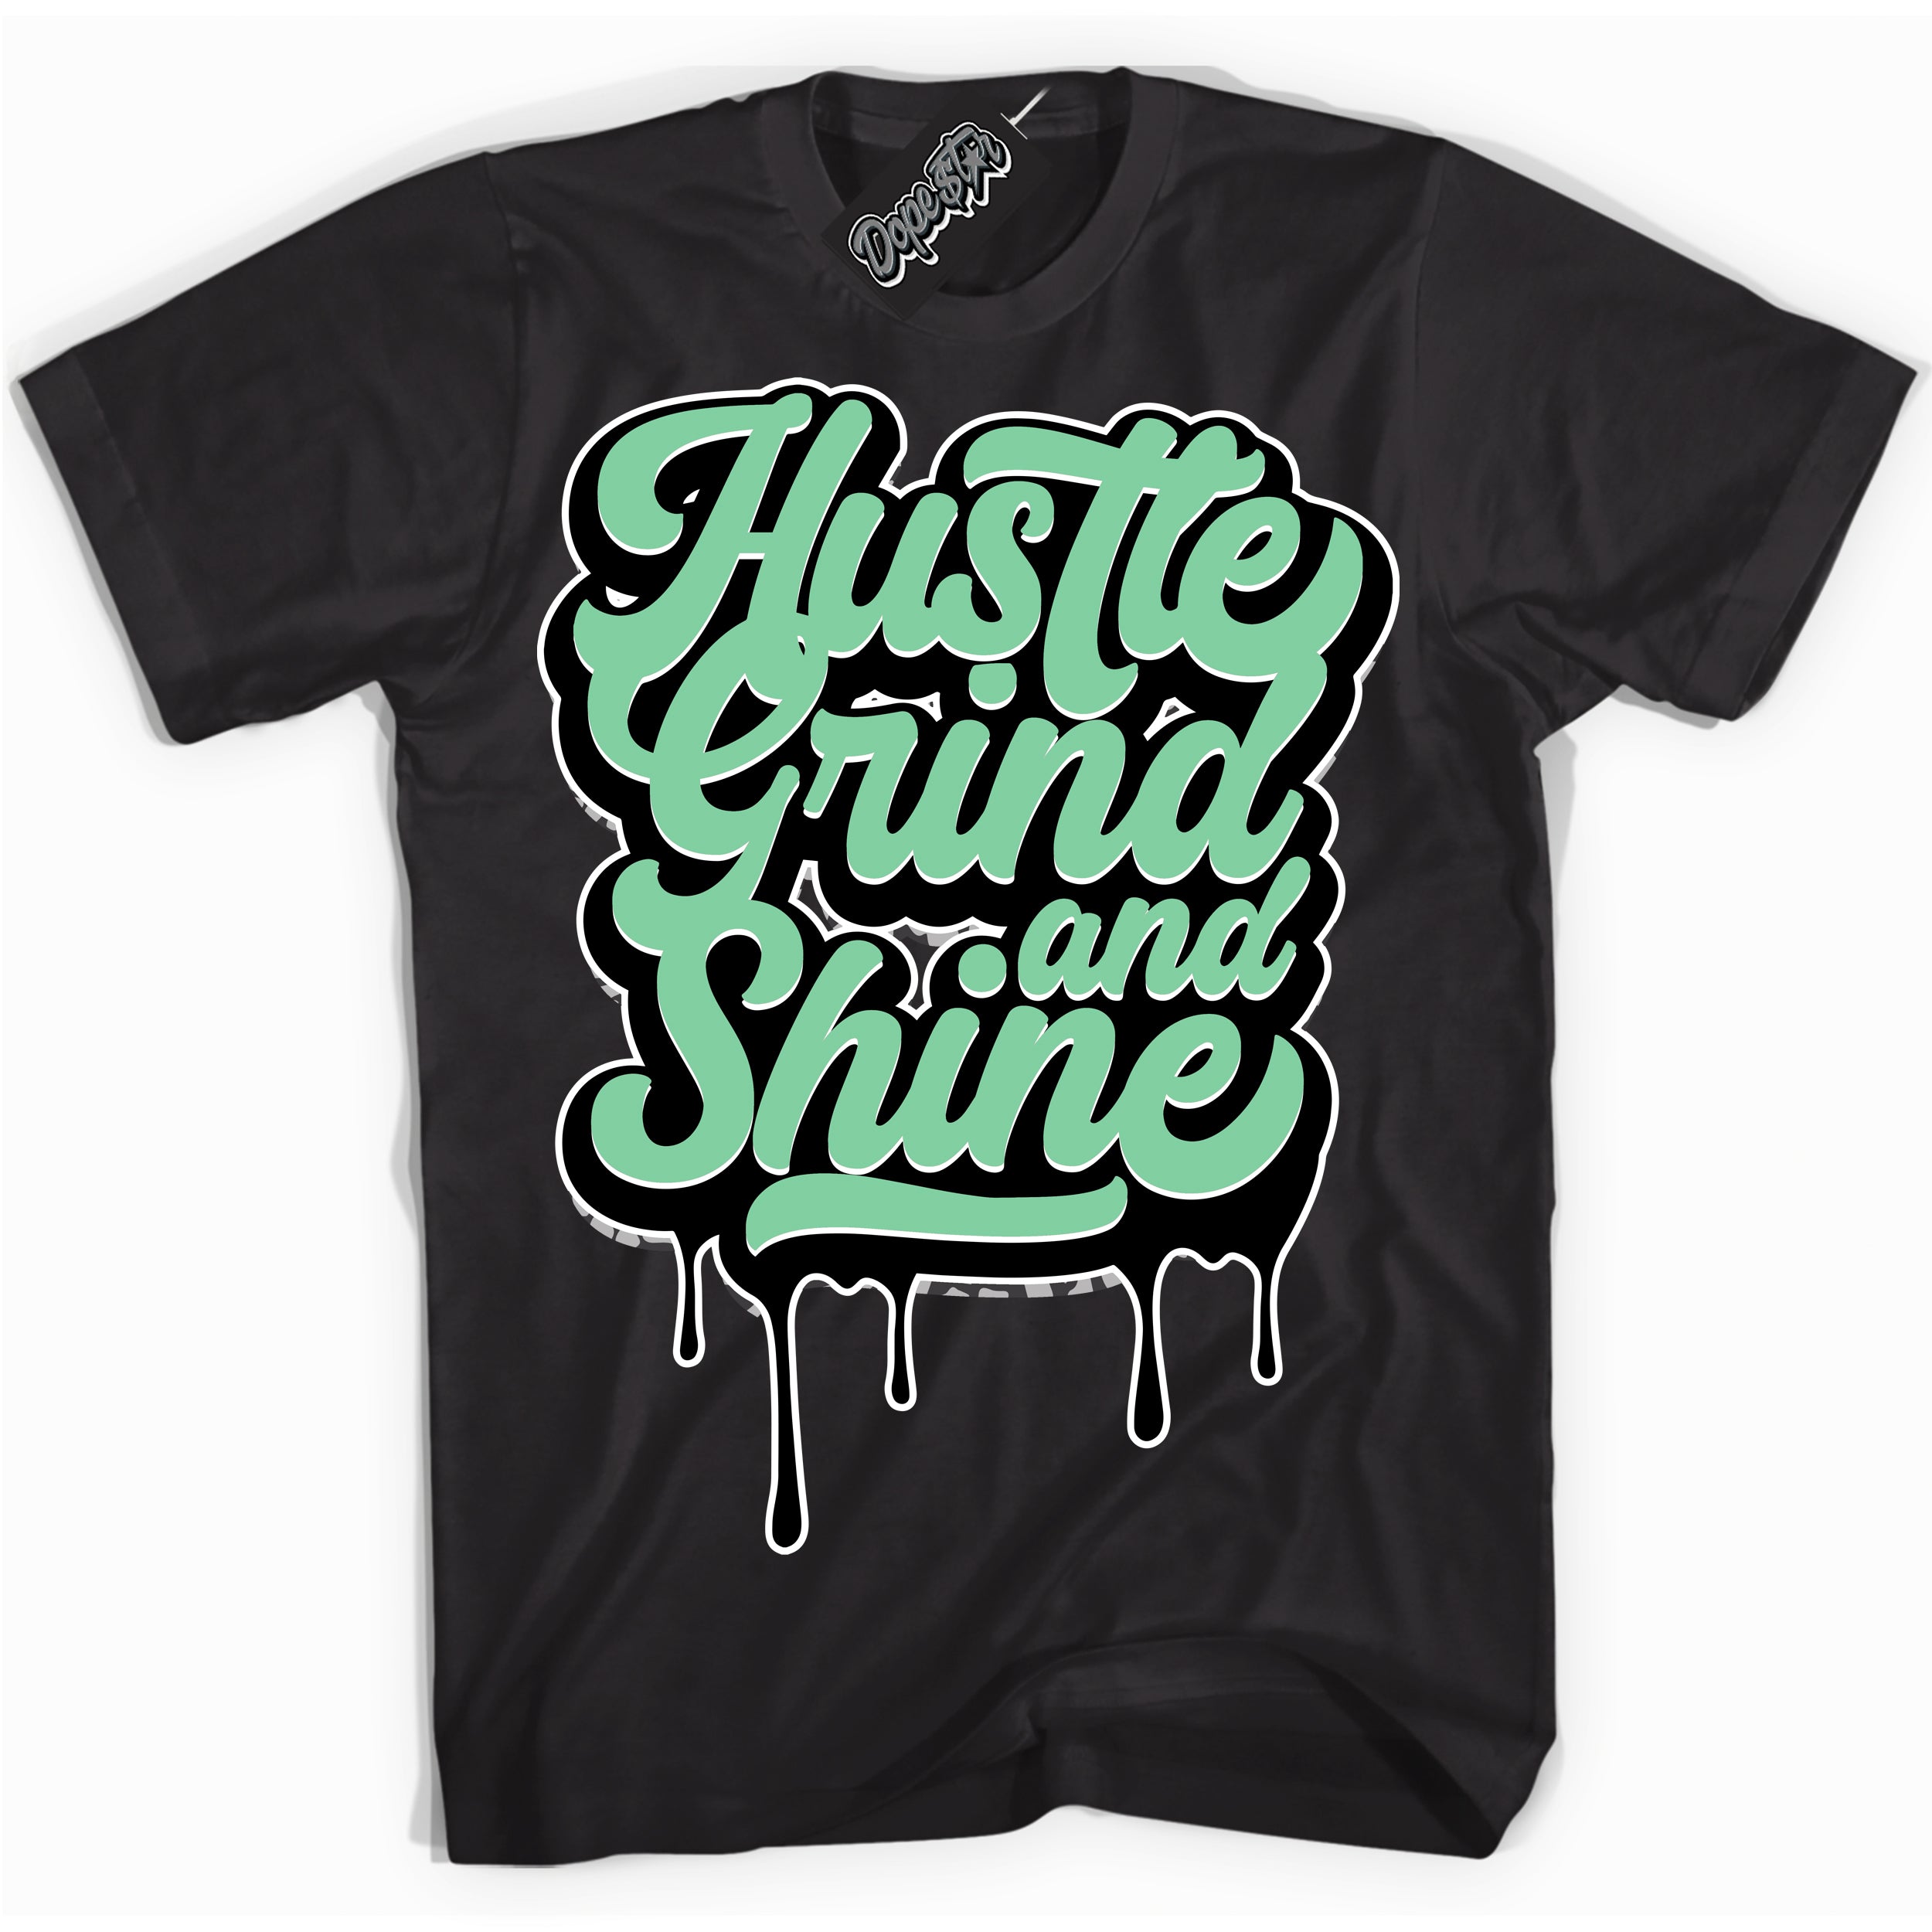 Cool Black graphic tee with “ Hustle Grind And Shine ” design, that perfectly matches Green Glow 3s sneakers 